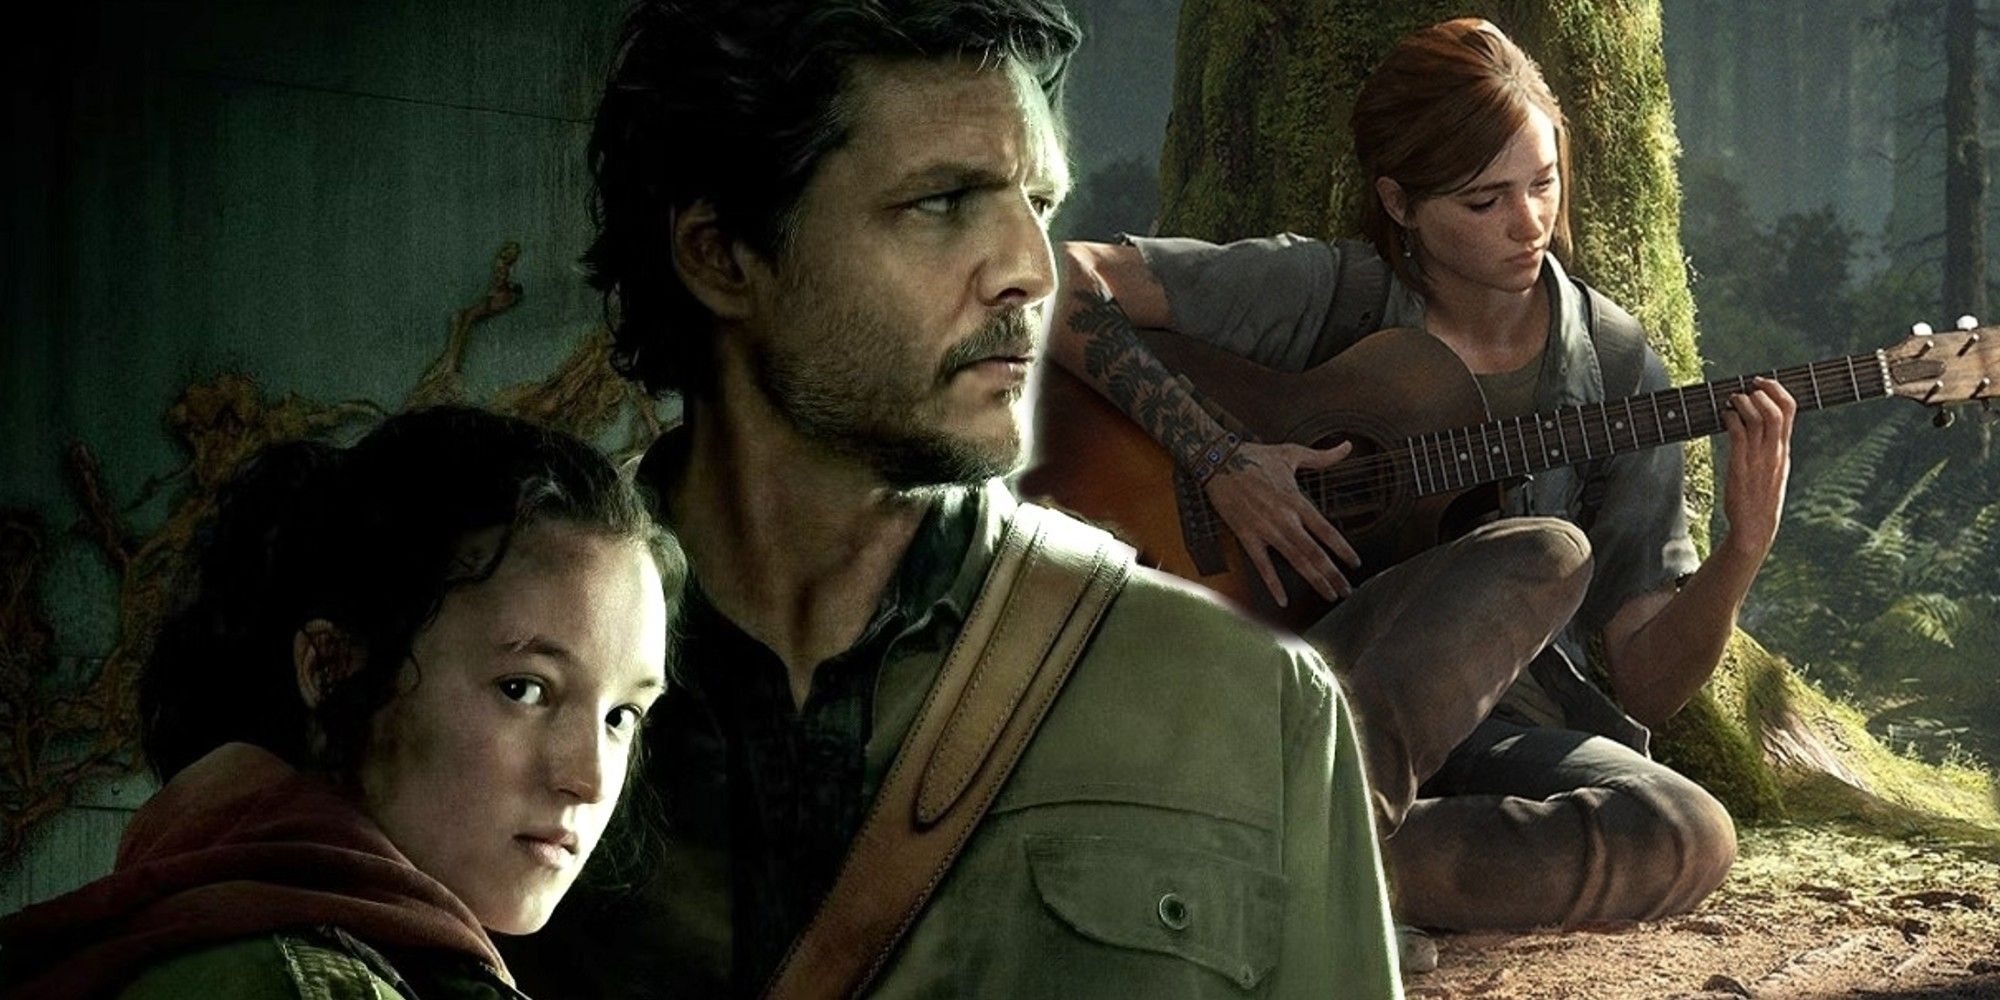 Pedro Pascal and Bella Ramsay as Joel and Ellie in HBO's The Last of Us adaption, next to promotional artwork for The Last of Us Part 2, showing Ellie playing her guitar while sitting against a tree.